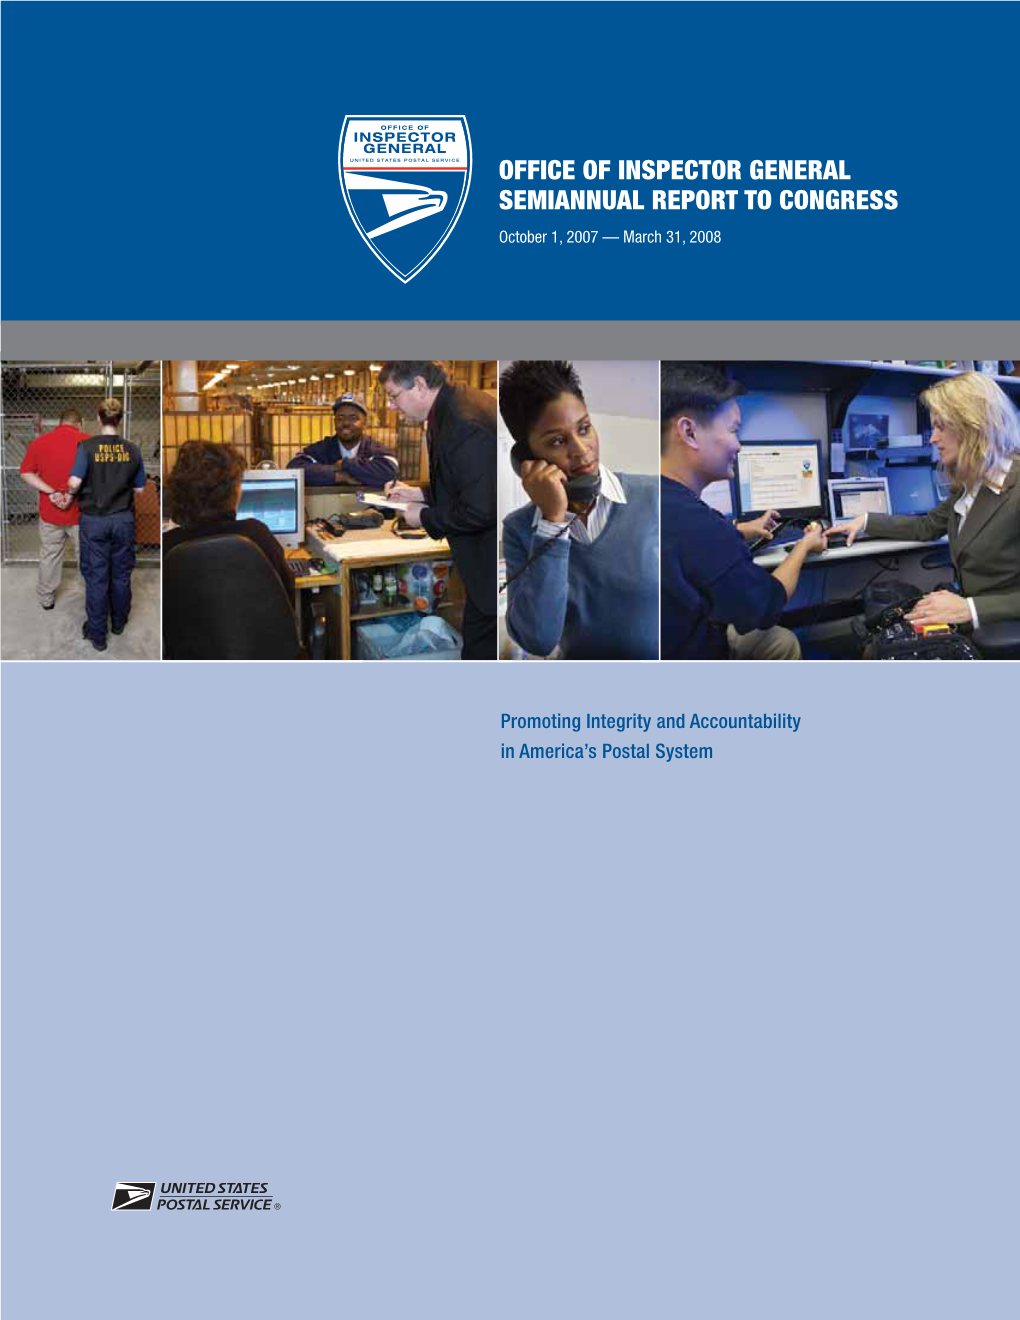 Views, and Investigations Relating to Postal Service Programs and Operations To